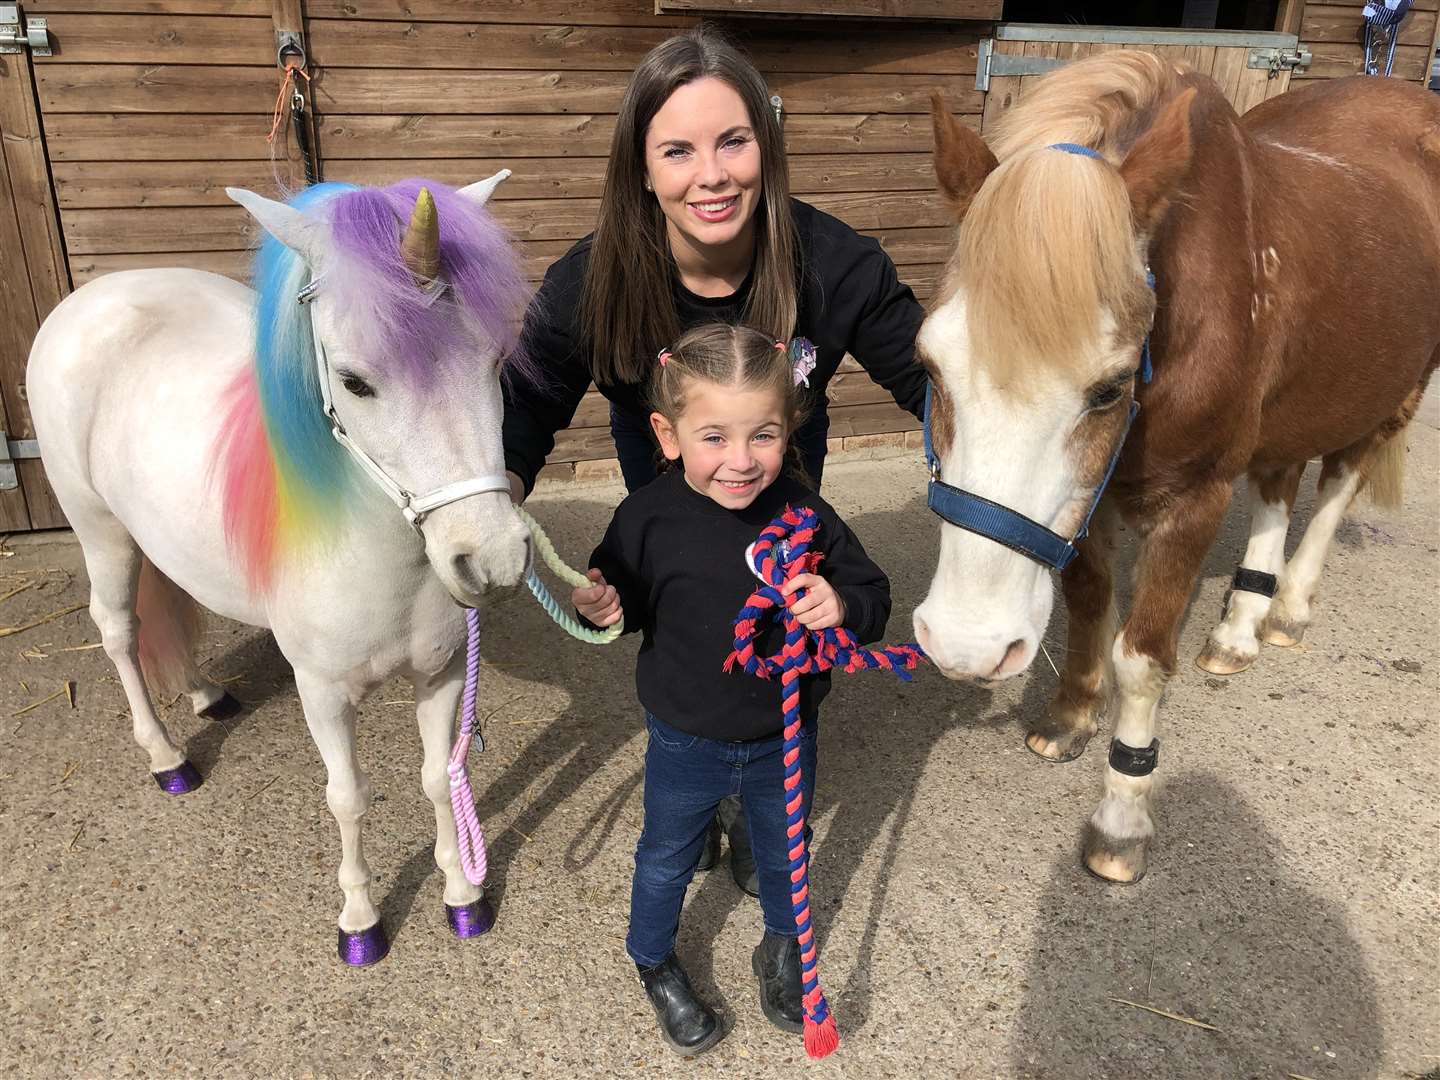 From left: Henny the unicorn, Claire and daughter Sophia and horse Joey